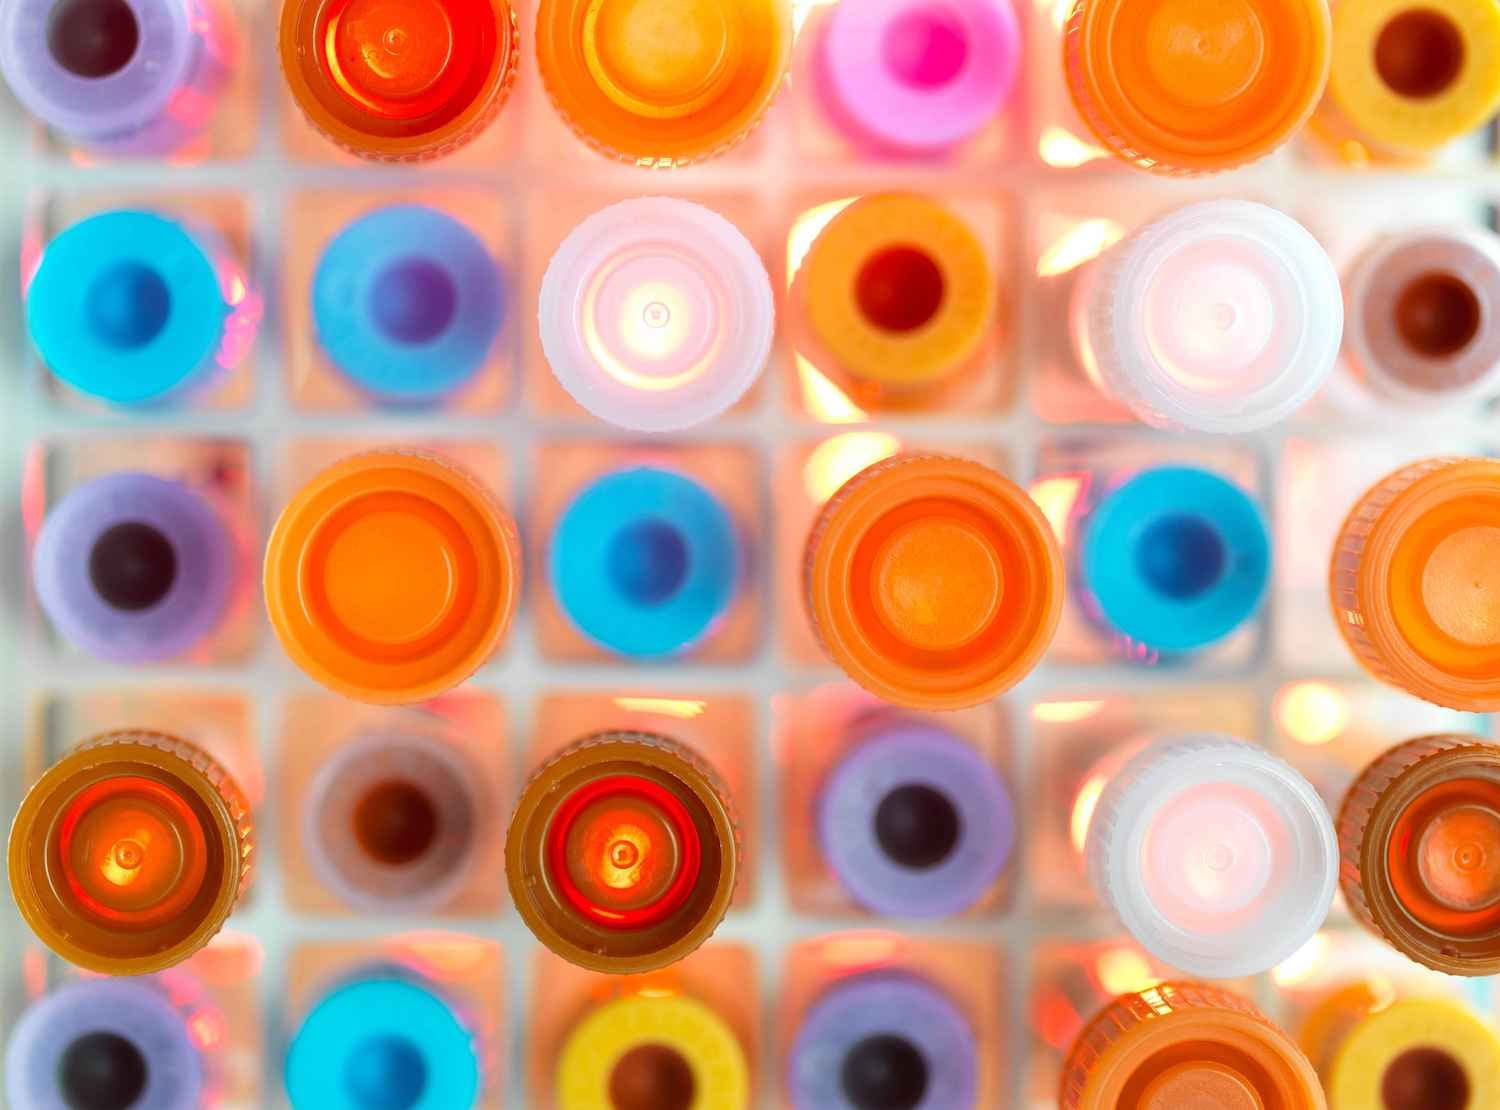 Abstract overhead image of chemical vials